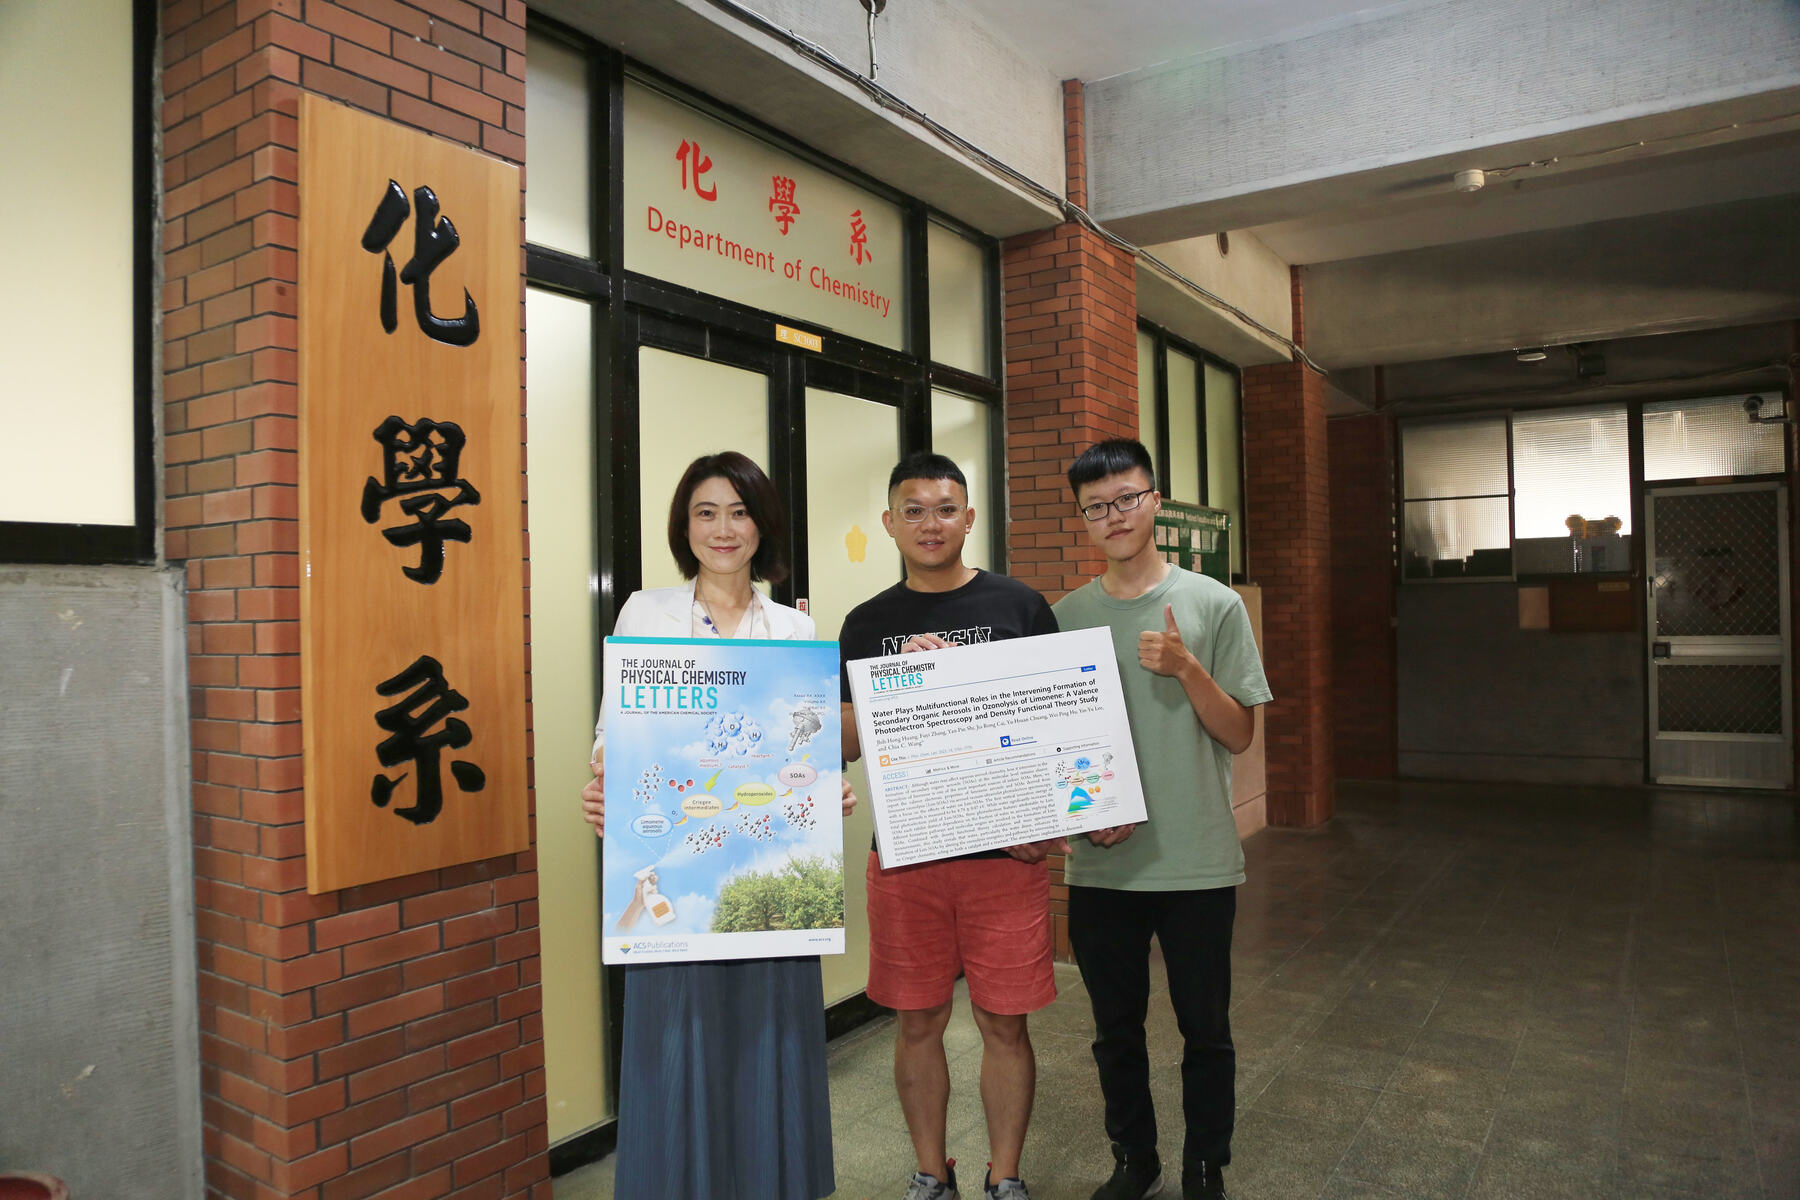 The latest study conducted by the team led by Chia C. Wang (first from the left of the photo), the Associate Professor of the NSYSU Department of Chemistry and Director of the NSYSU Aerosol Science Research Center, has been published in The Journal of Physical Chemistry Letters, and selected as the inner cover story in the issue